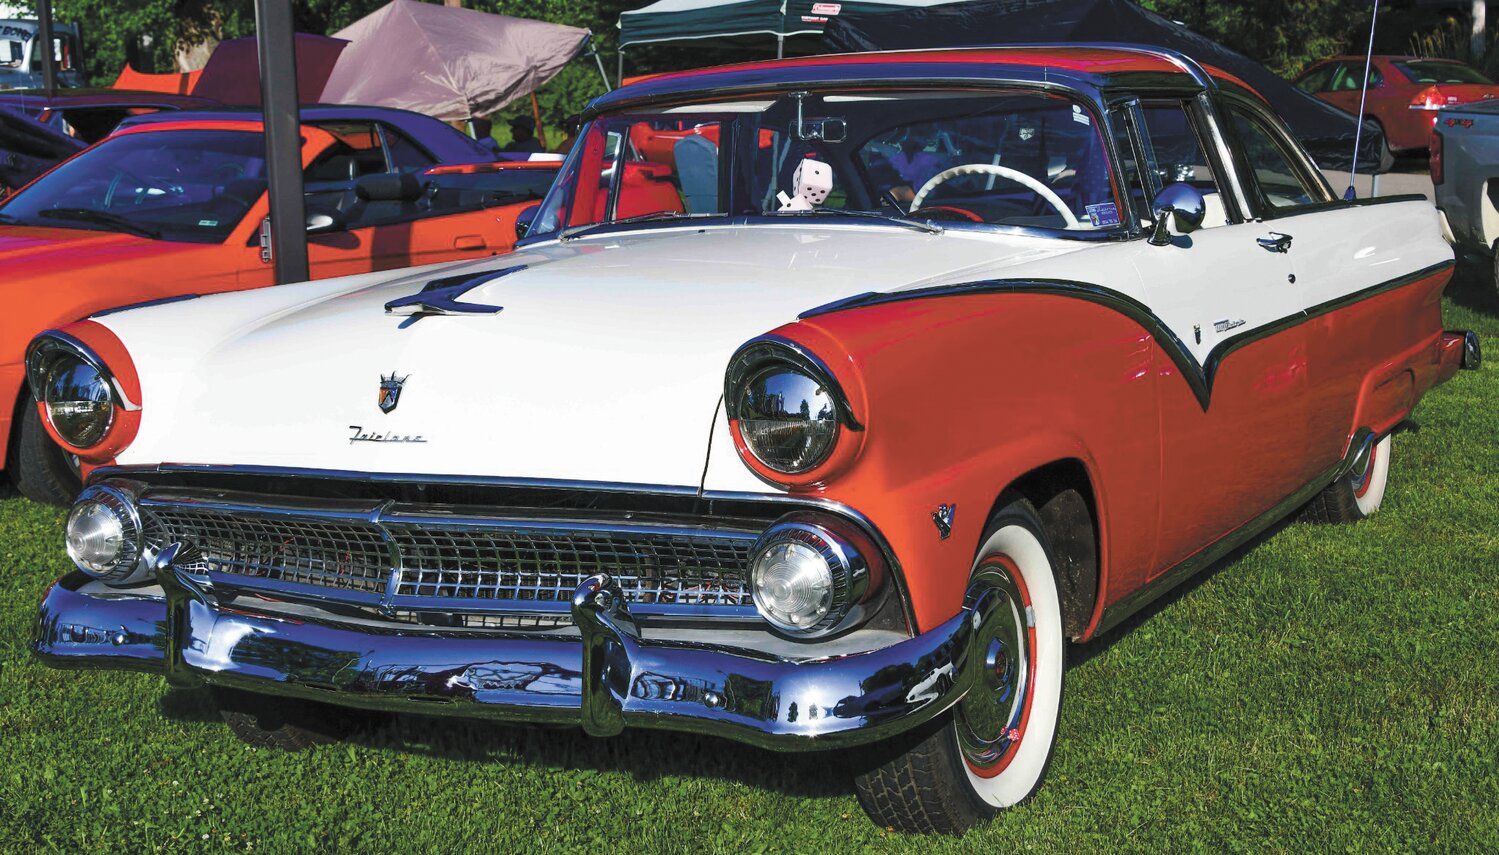 A cruise-in is part of the Summer in the Park festivities at Waveland.